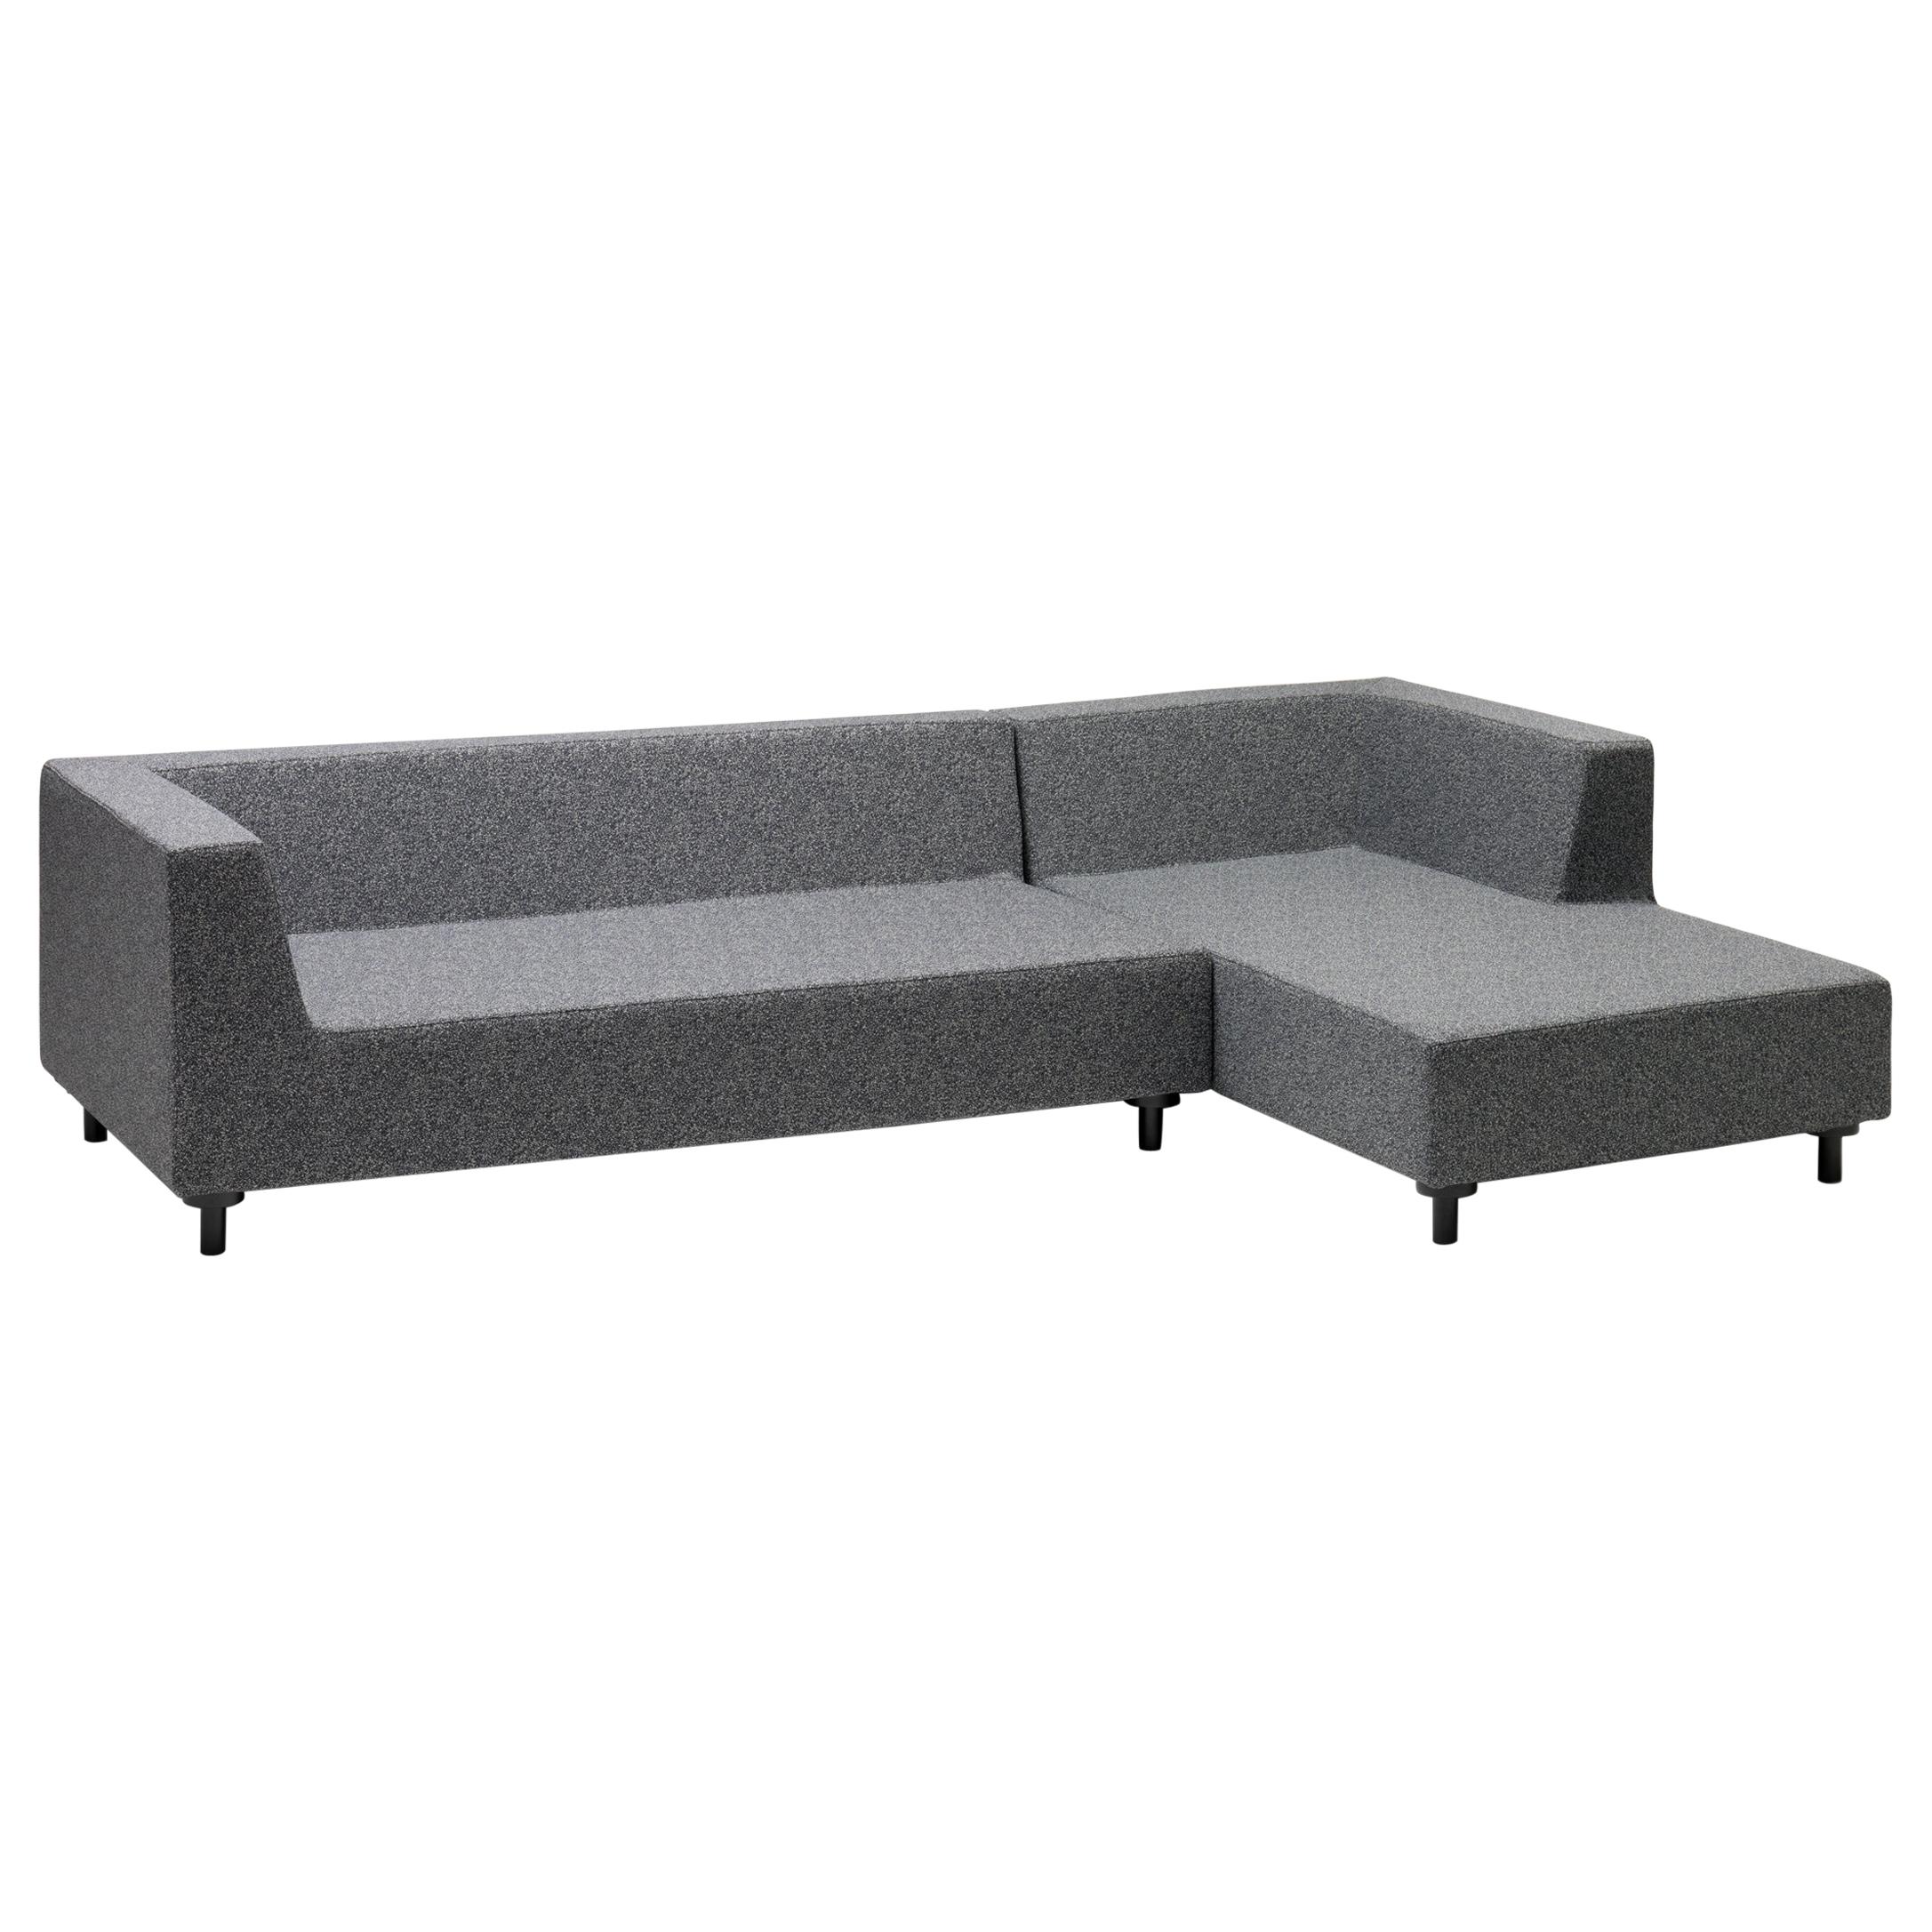 Established & Sons Barbican Sectional in Gray by Konstantin Grcic